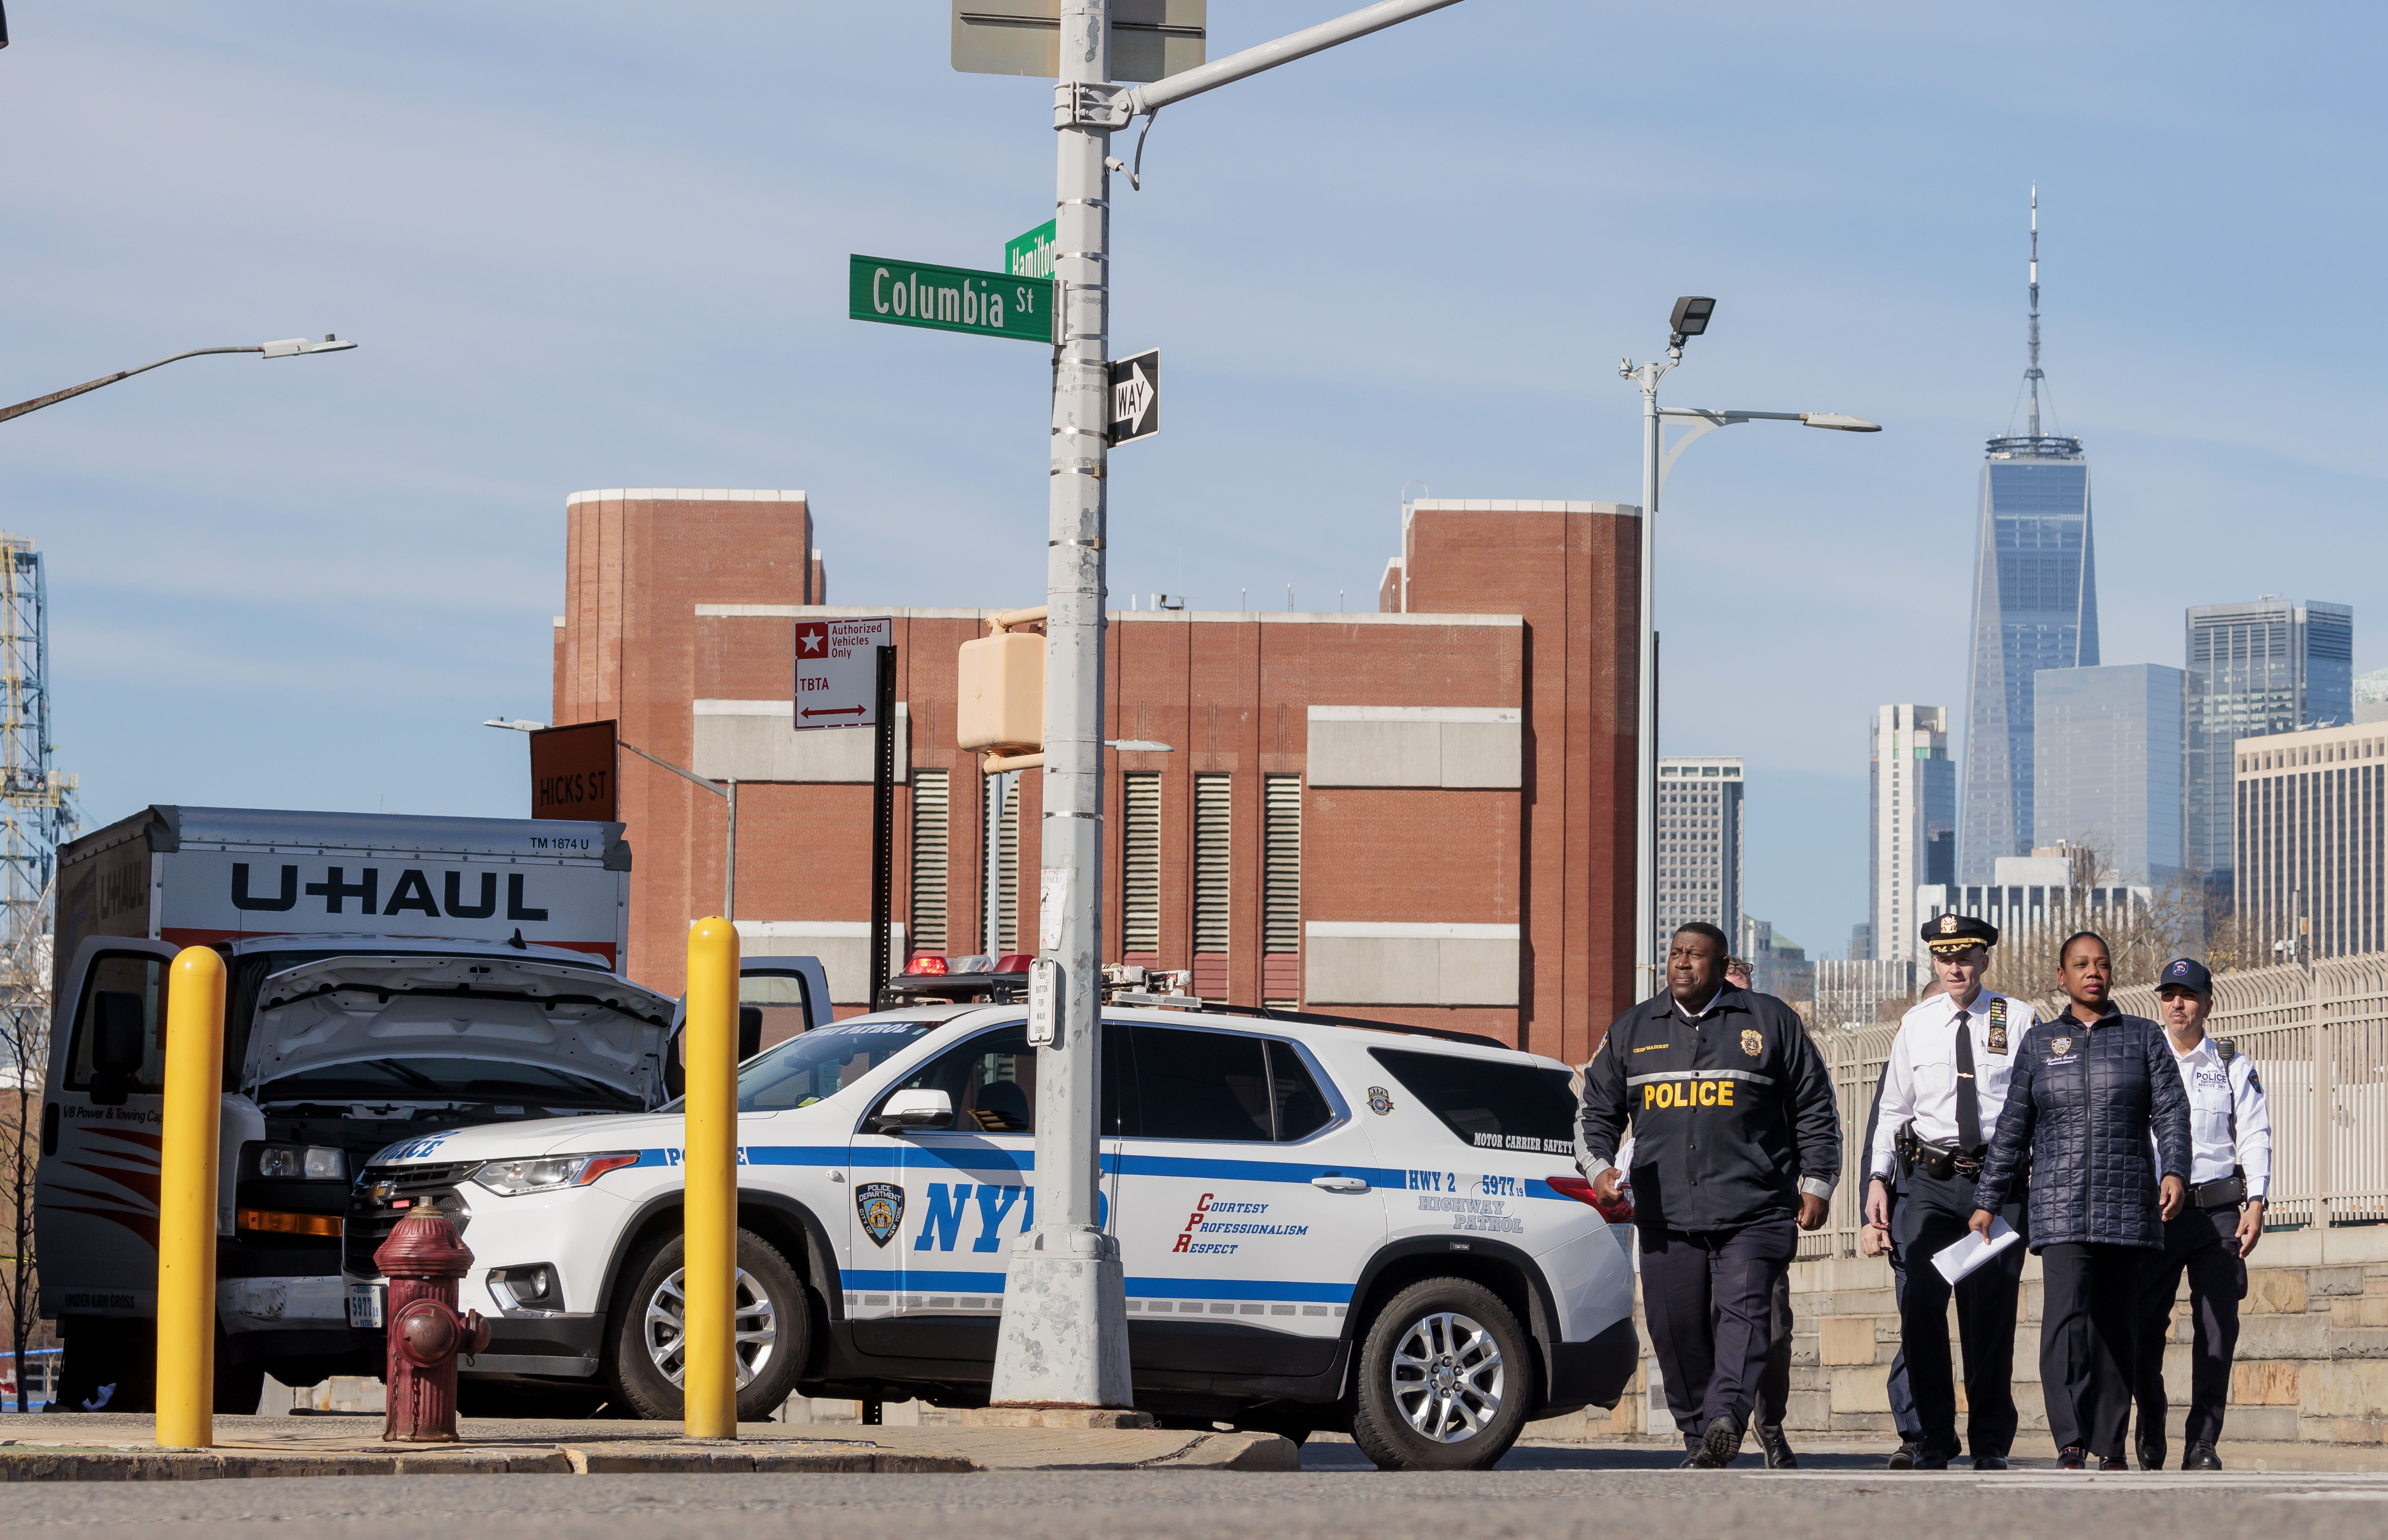 New York City Police Commissioner Keechant Sewell (2-R) arriving for a press conference on the scene where a U-haul moving truck (L) was stopped after running over multiple pedestrians in Brooklyn.